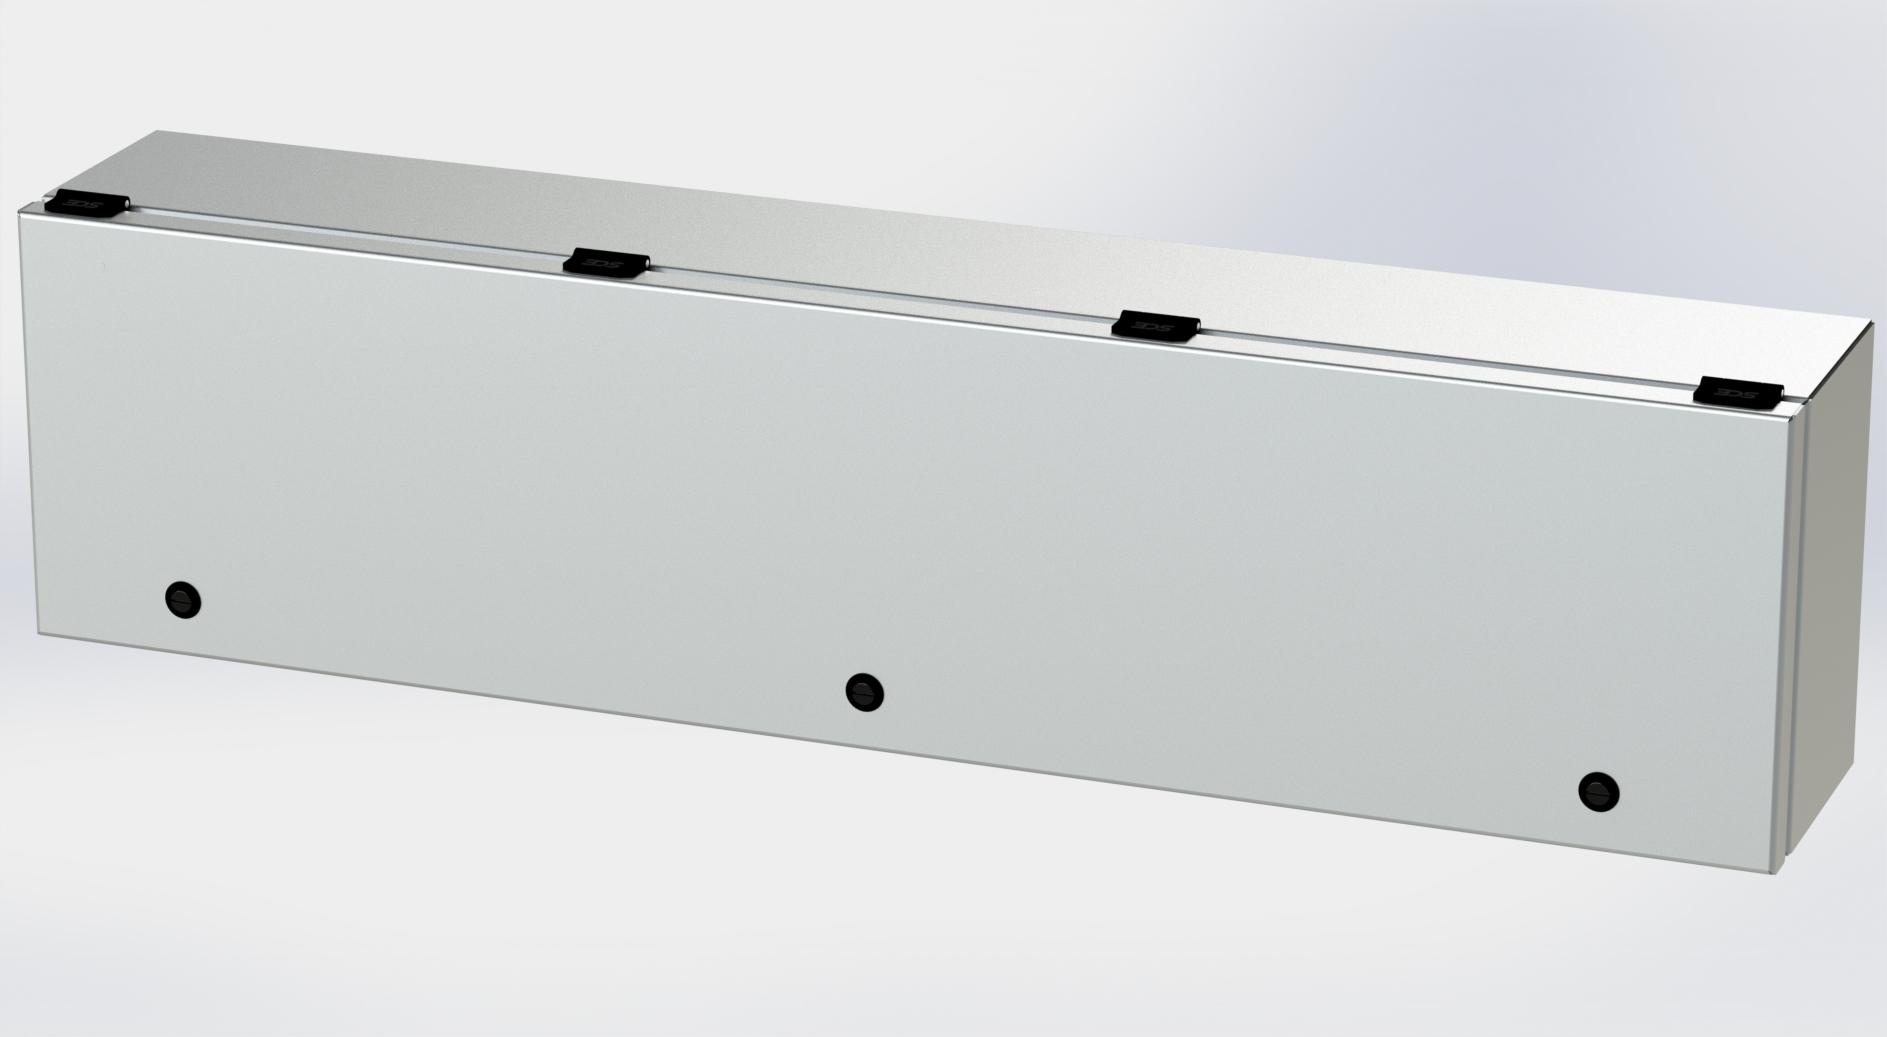 Saginaw Control SCE-L9366ELJSS S.S. ELJ Trough Enclosure, Height:9.00", Width:36.00", Depth:6.00", #4 brushed finish on all exterior surfaces. Optional sub-panels are powder coated white.